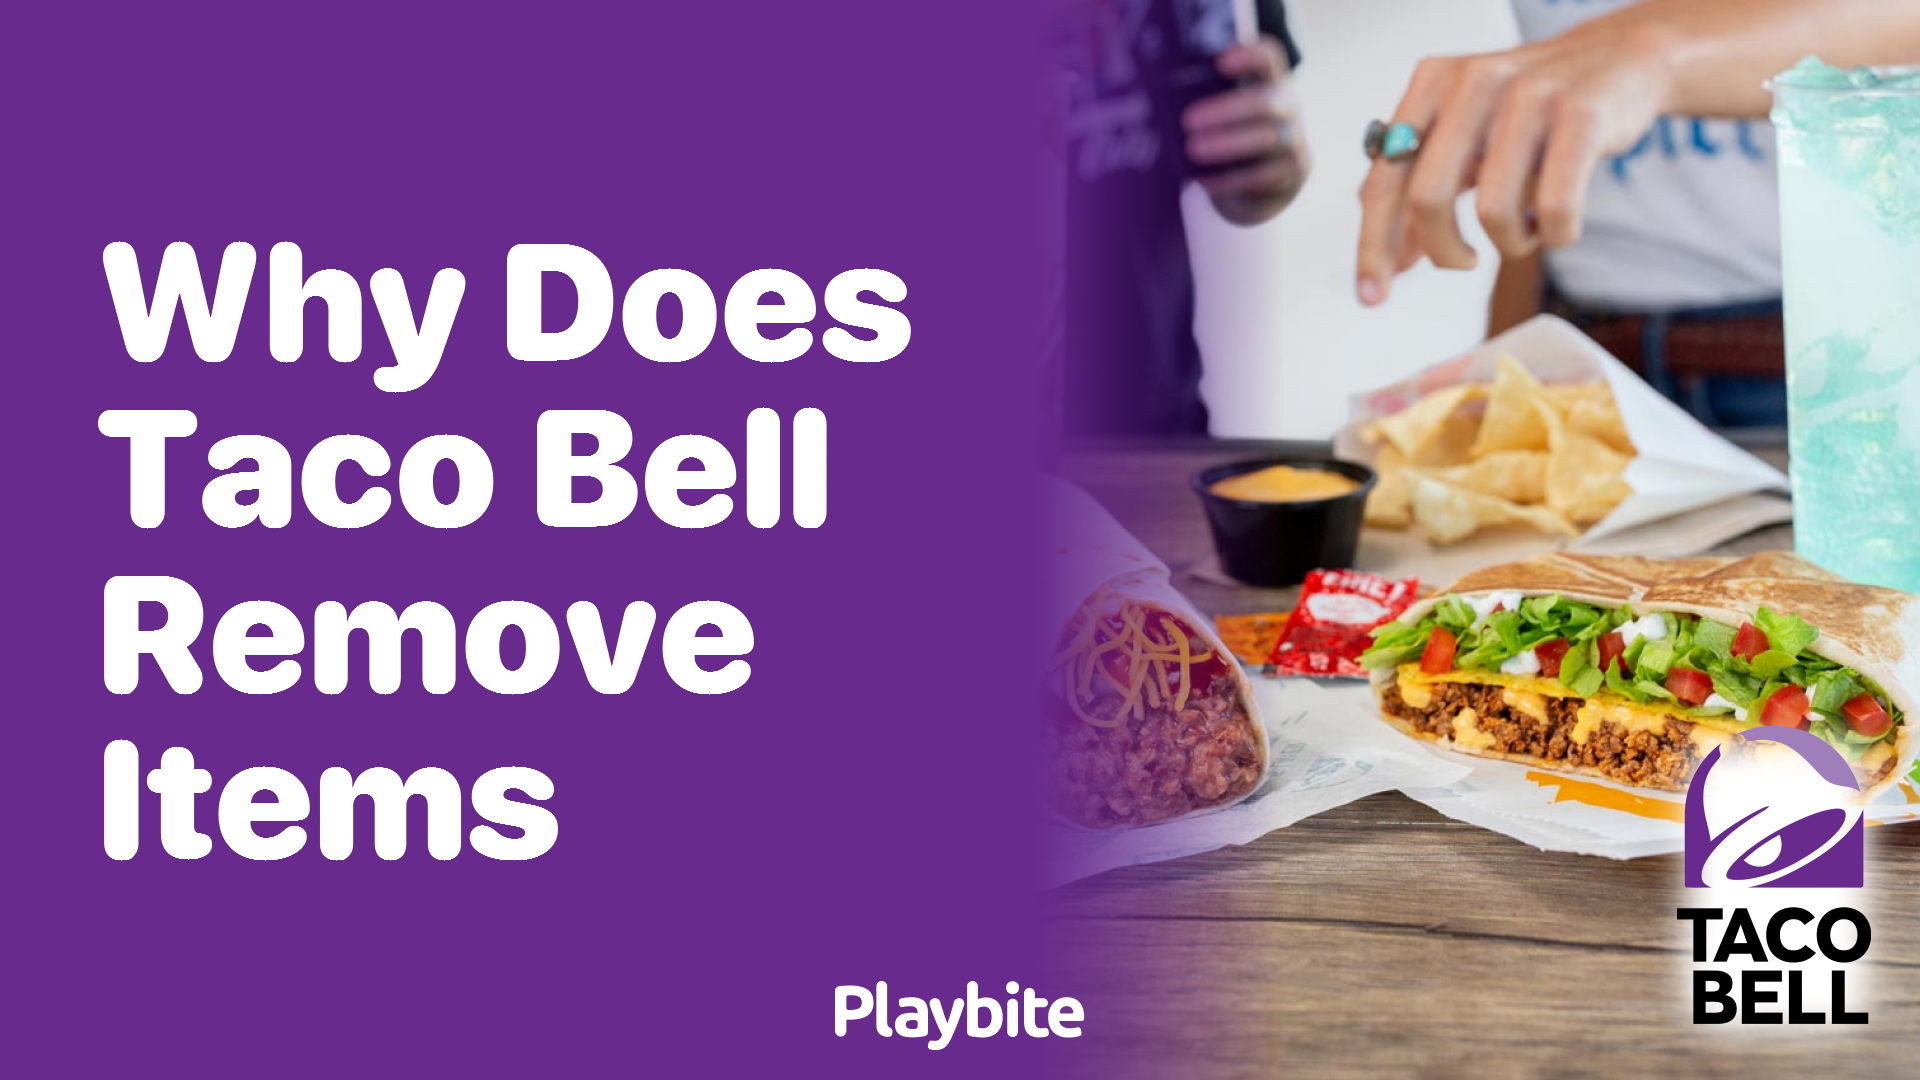 Why Does Taco Bell Remove Items from Their Menu?